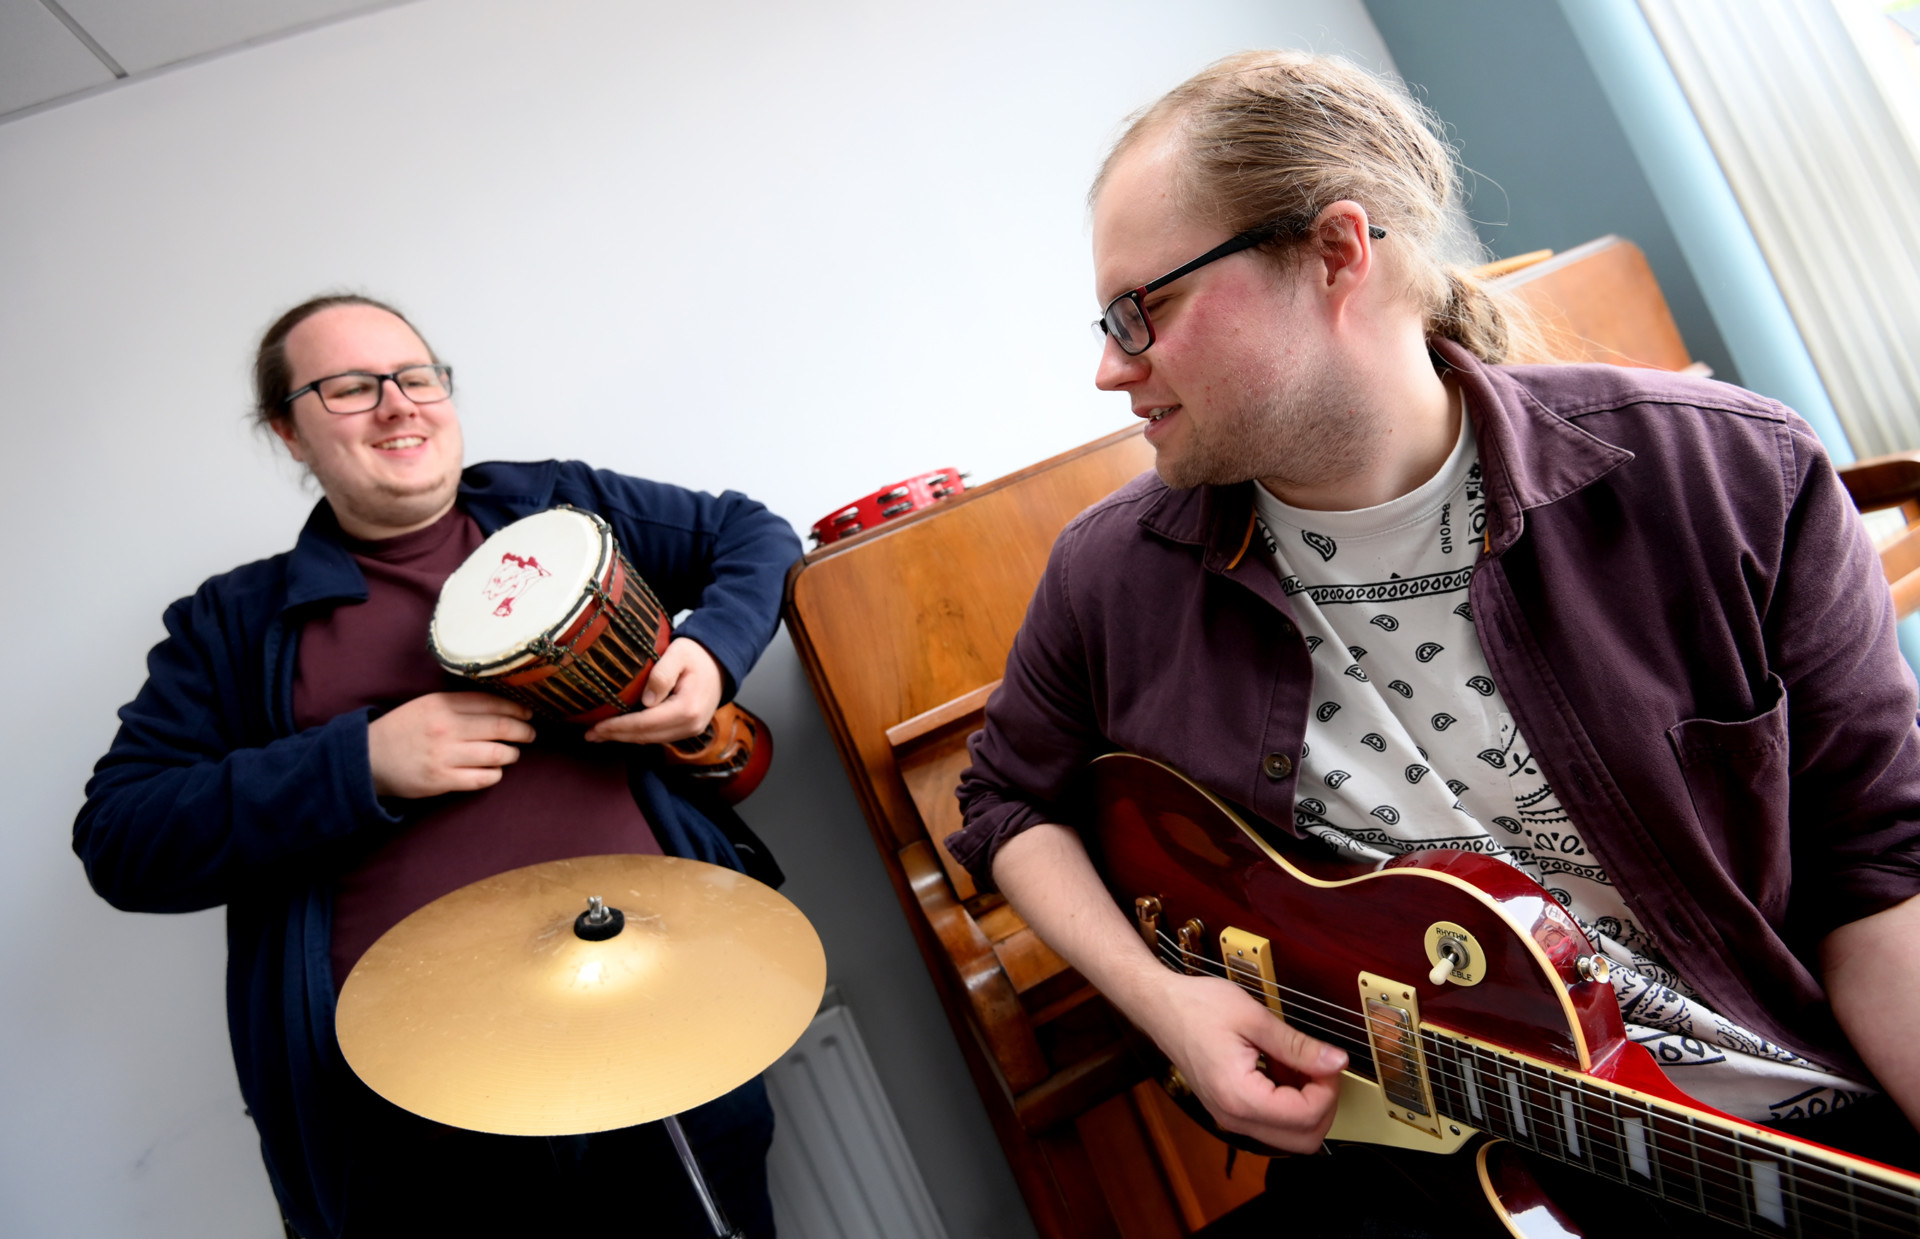 Cookstown centre hopes to expand music therapy for autism